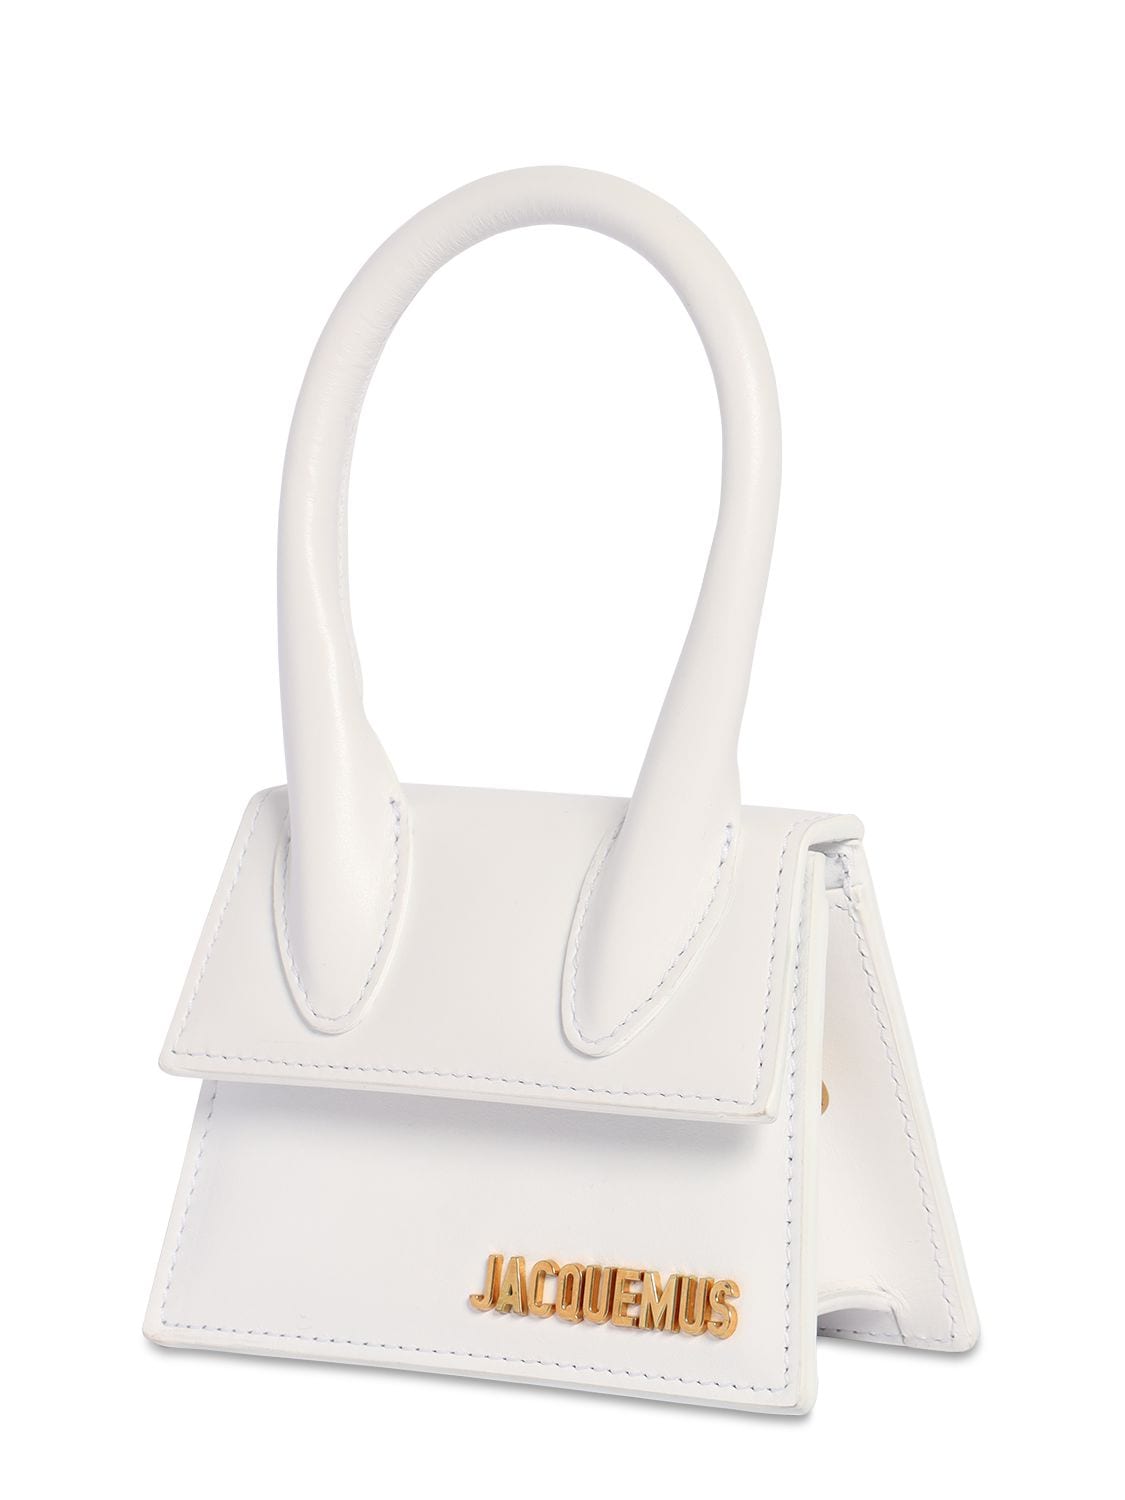 Jacquemus Le Chiquito Leather Top Handle Bag In White | ModeSens